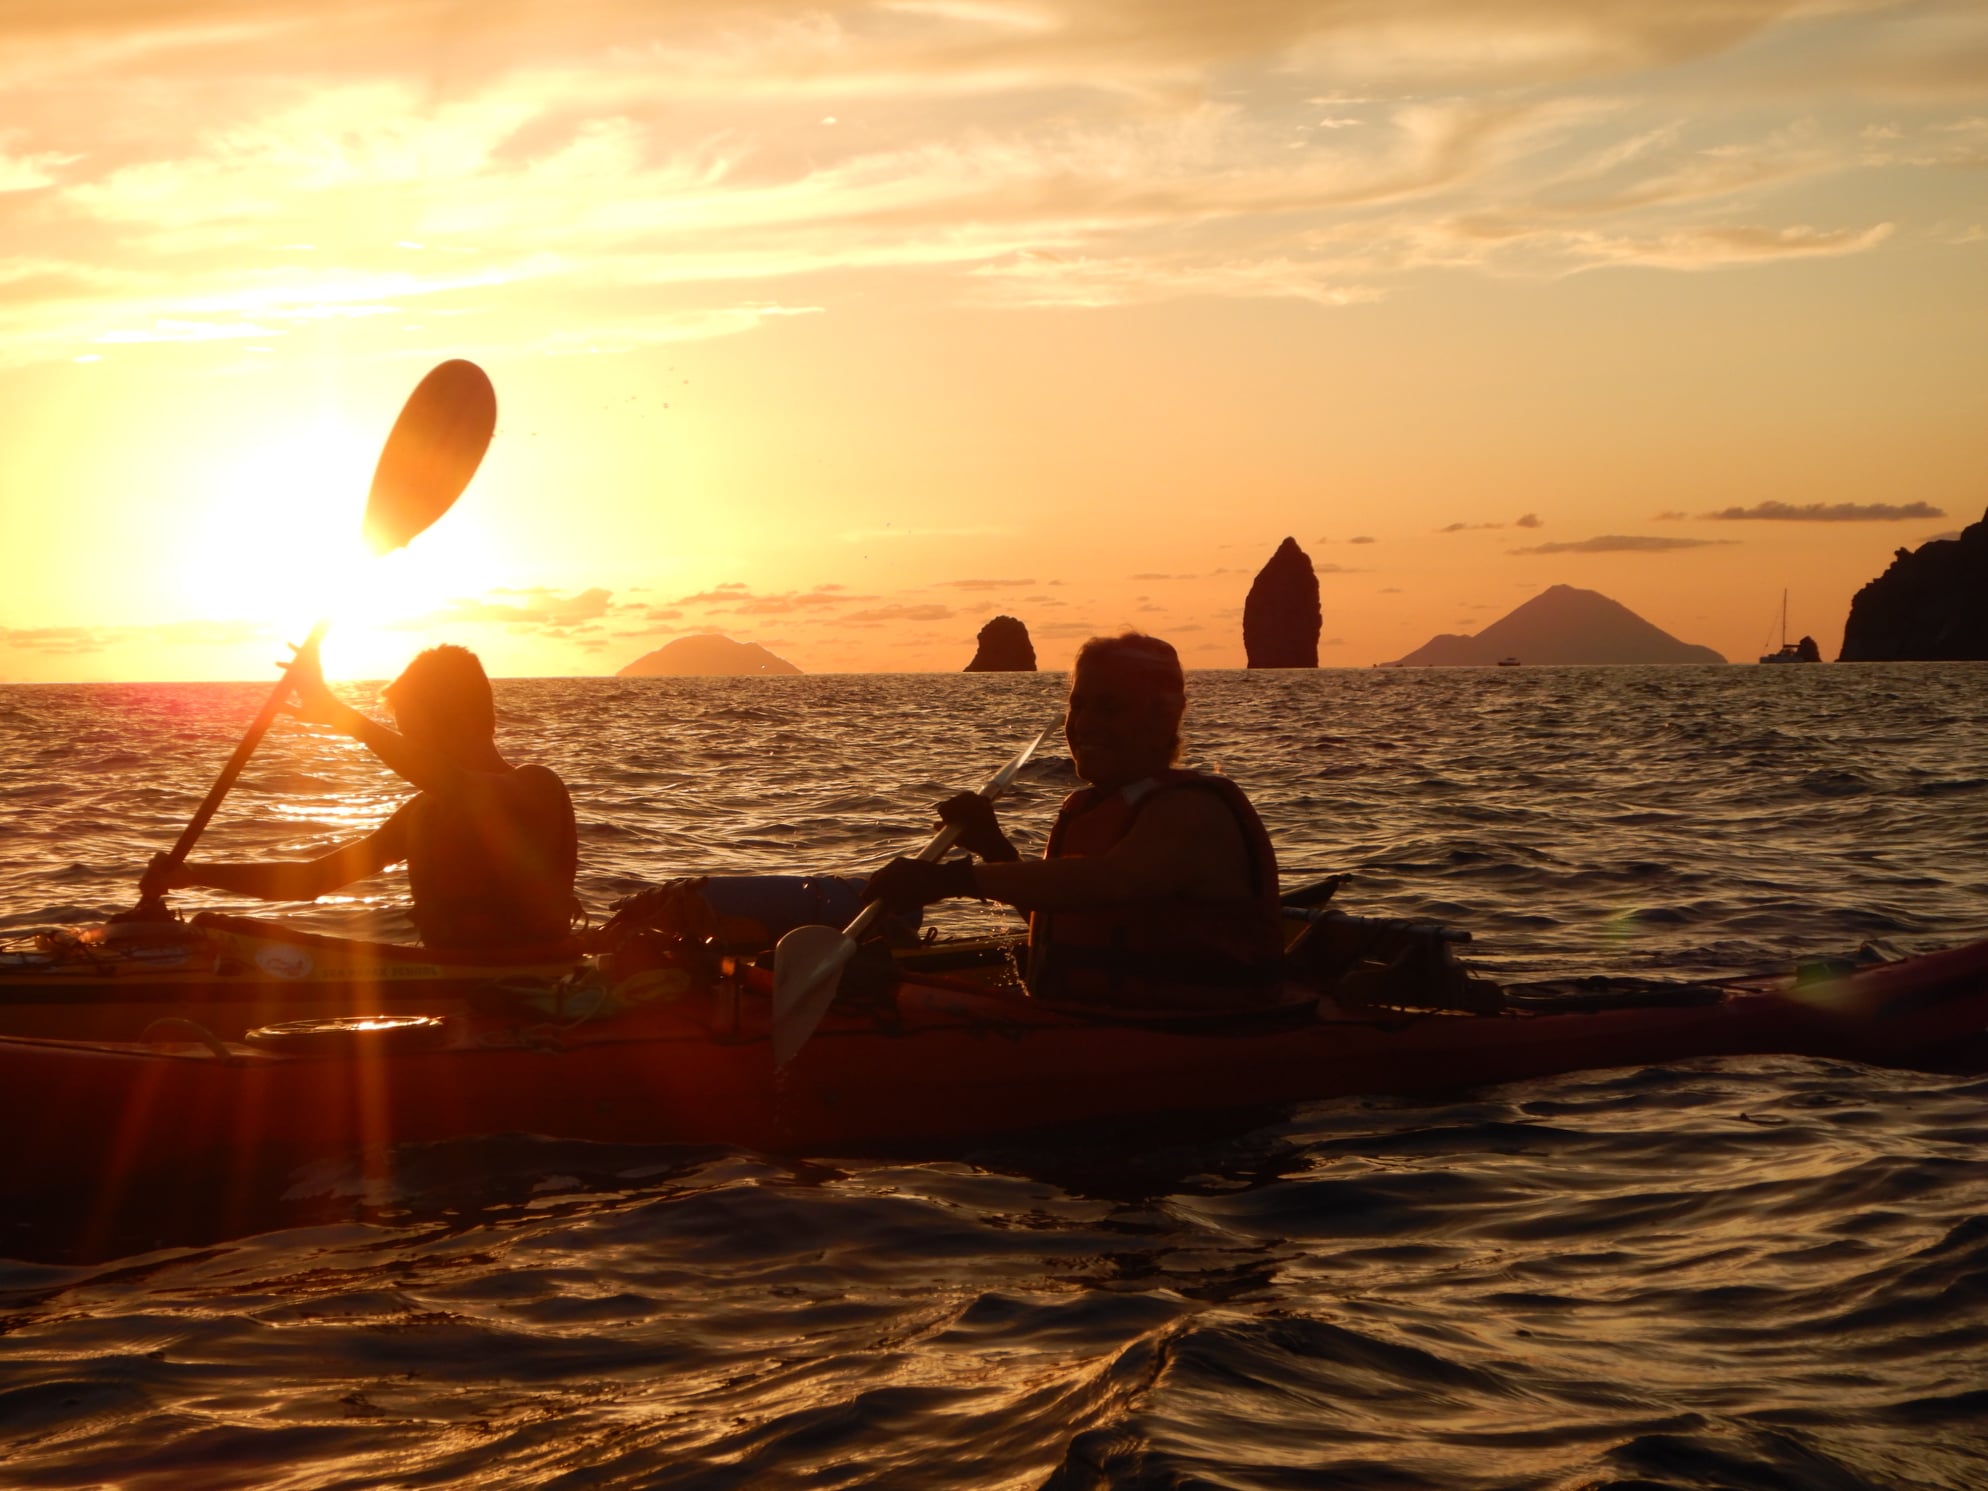  Escursioni giornaliere Sit on top Kayak e Snorkeling Tramonto a Vulcanelloo, Isole Eolie